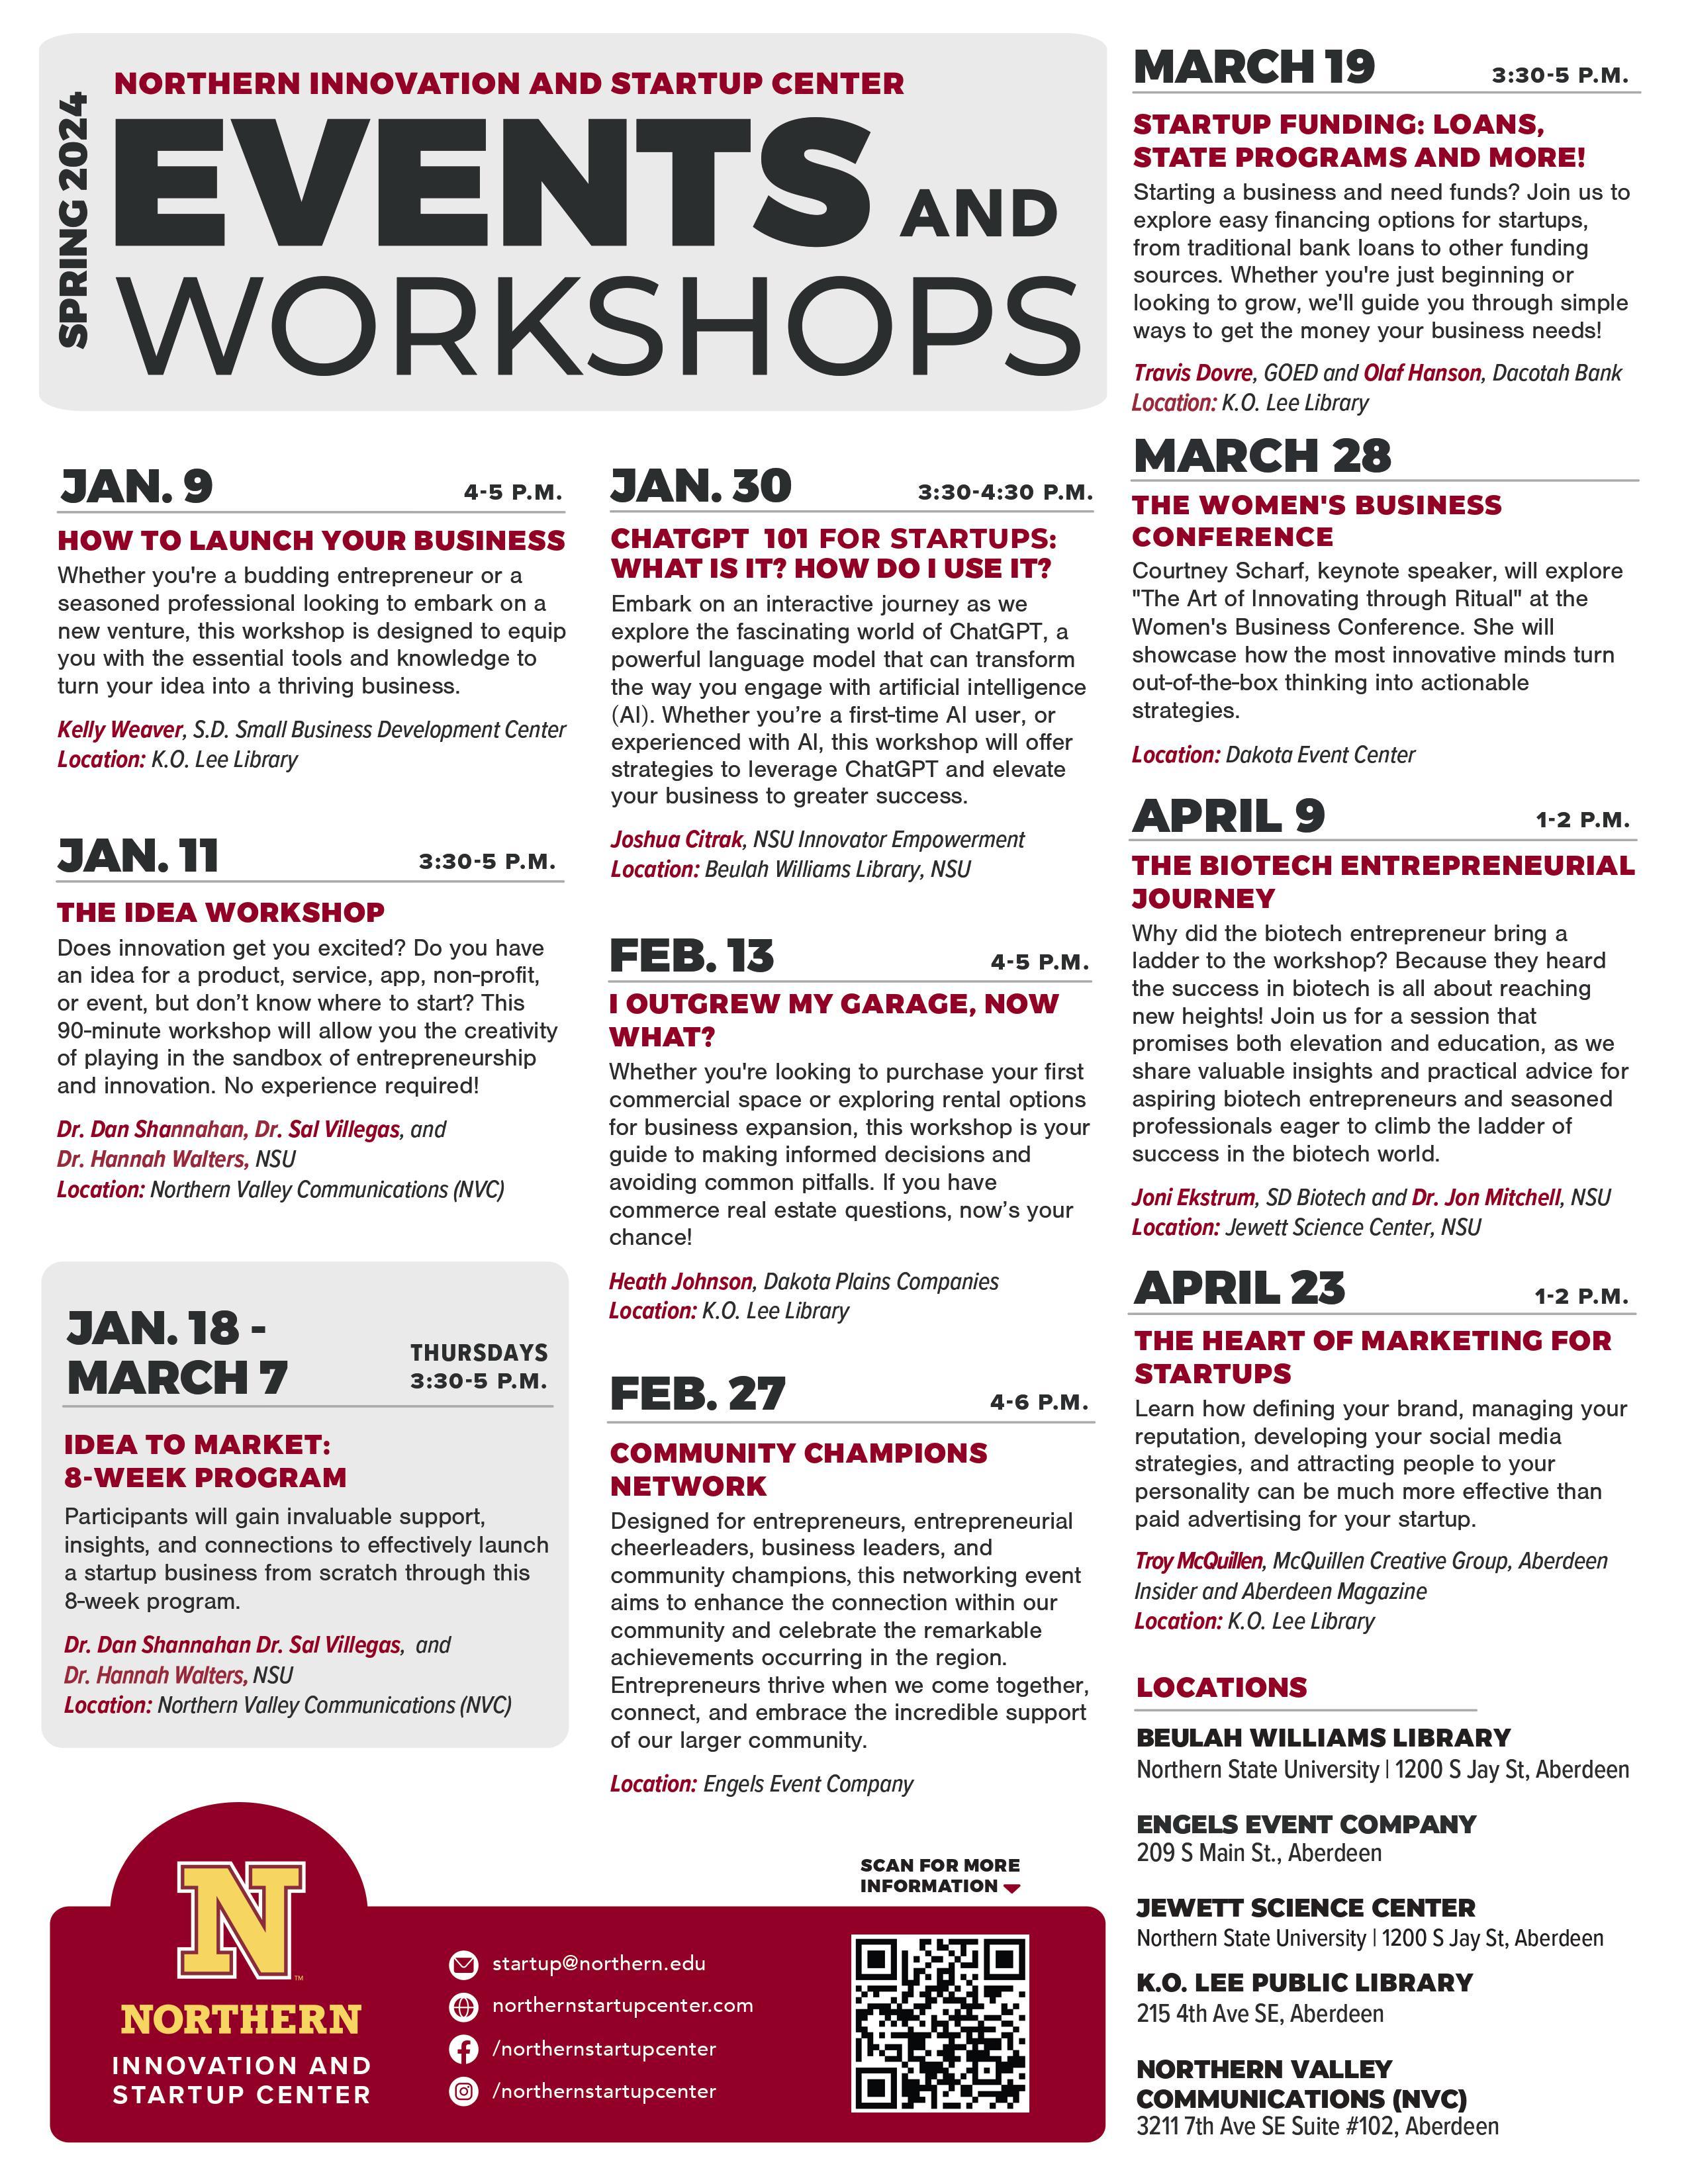 A list of events being held by the Innovation Center